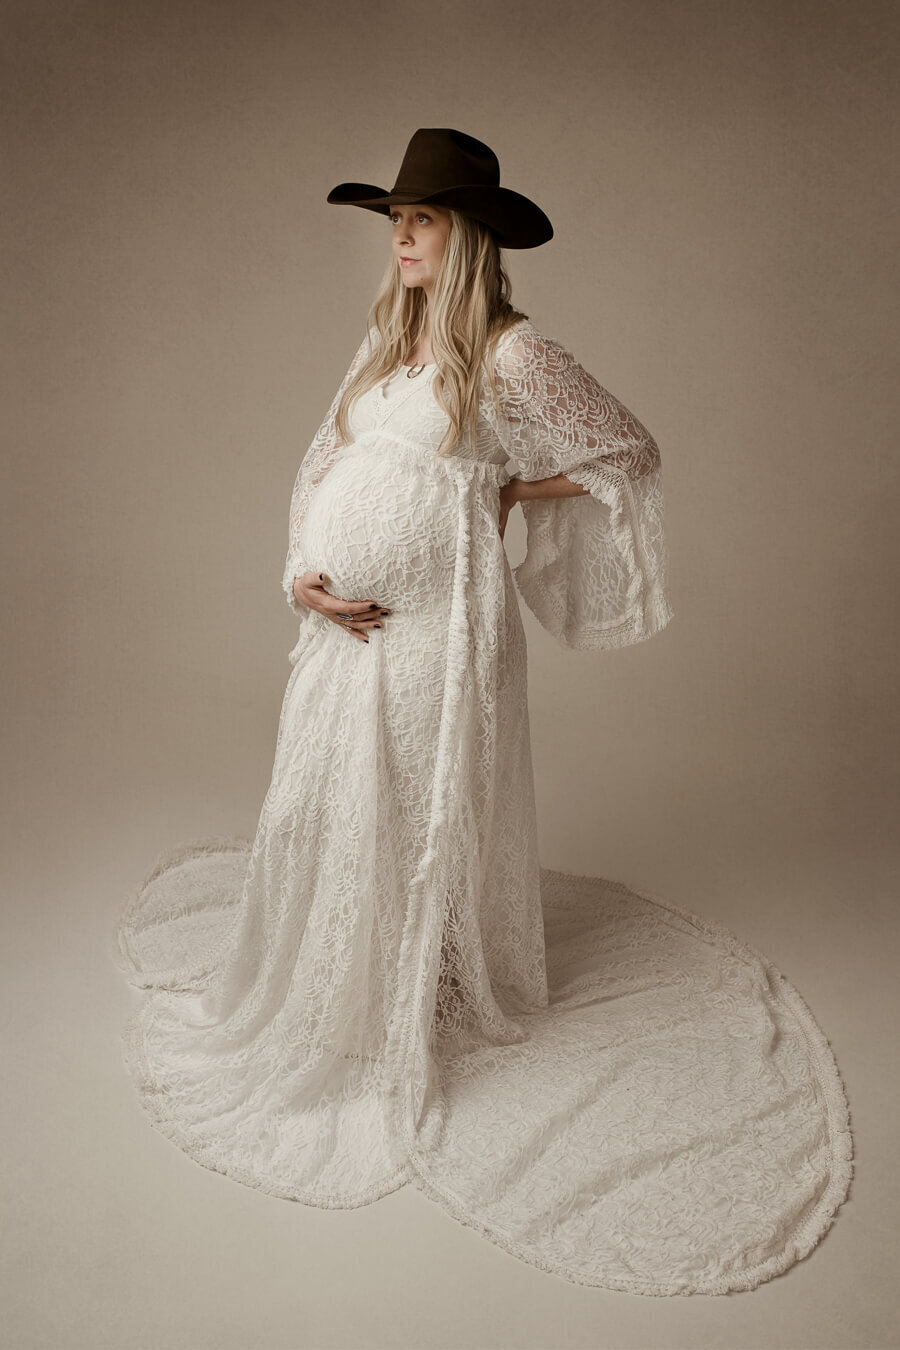 Boho maternity picture, woman in lace gown and cowboy hat